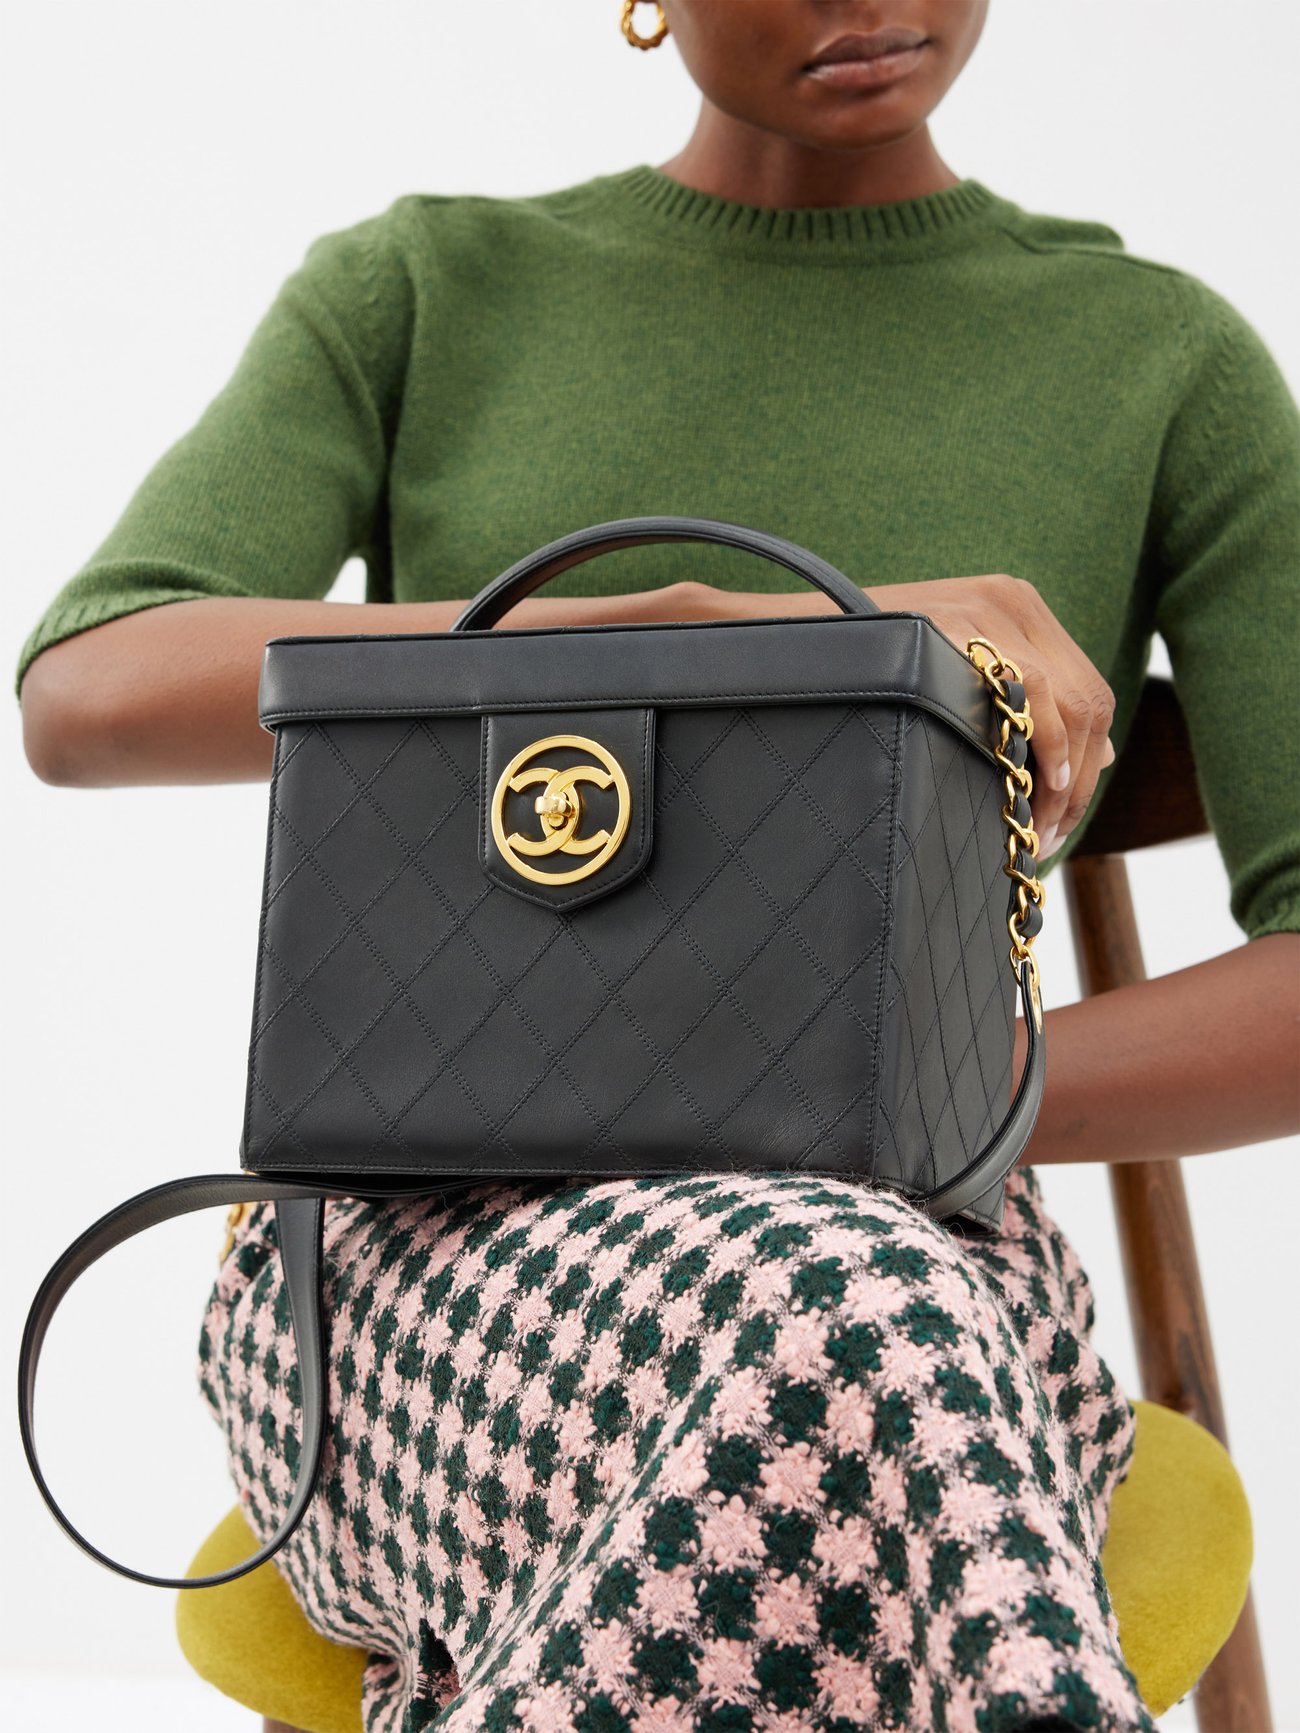 The Chanel Vanity Case, An Era's Most Coveted Design